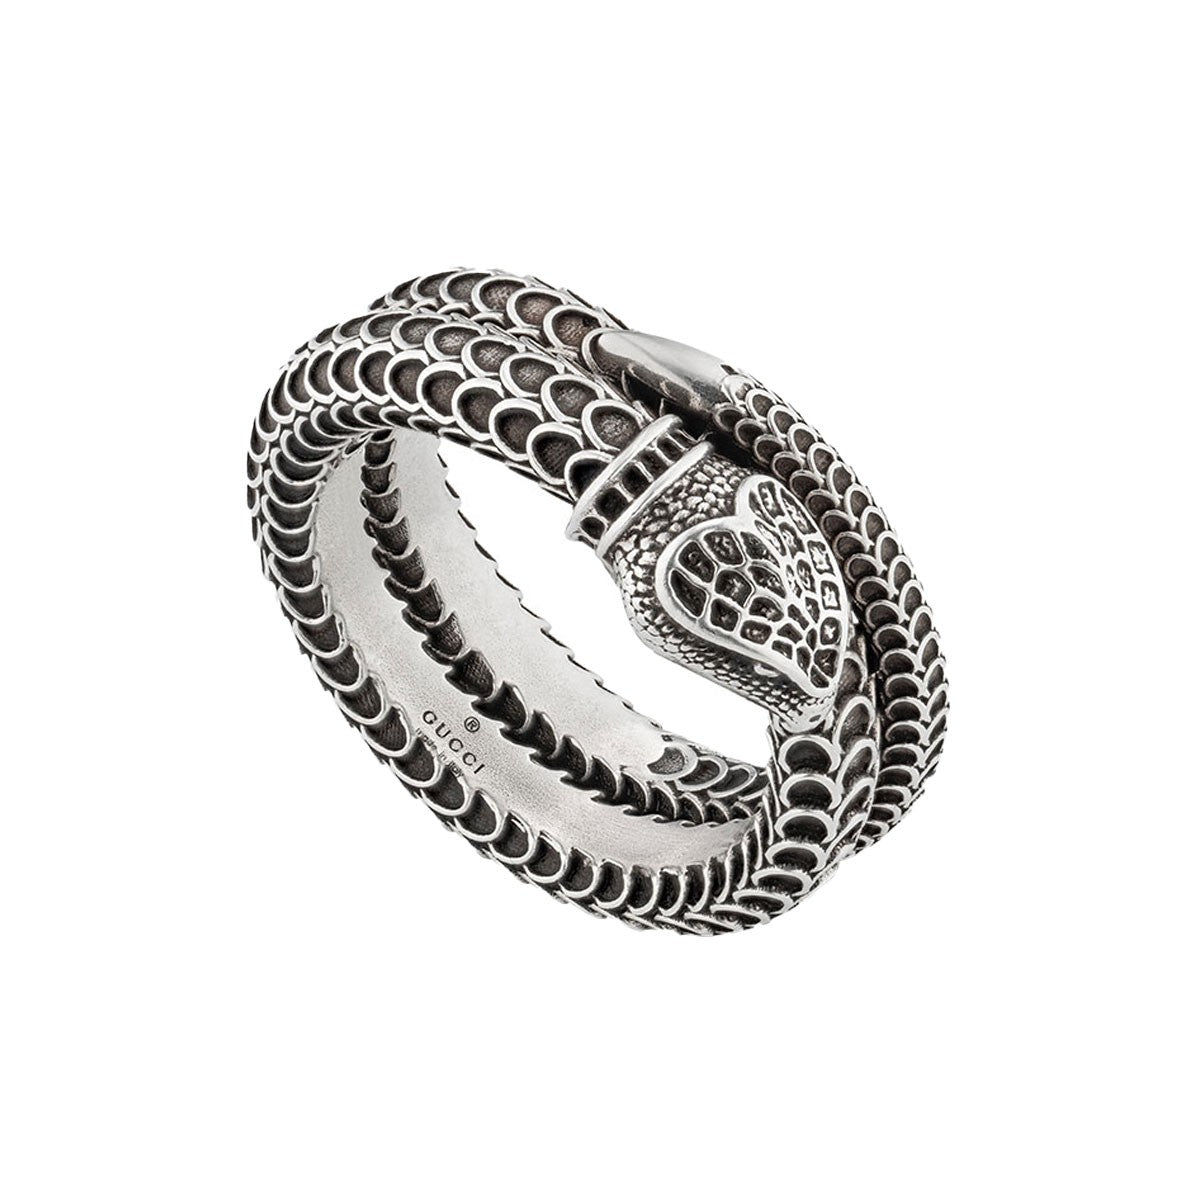 Gucci Garden Sterling Silver Snake Motif Ring YBC577294001 Gucci Jewelry